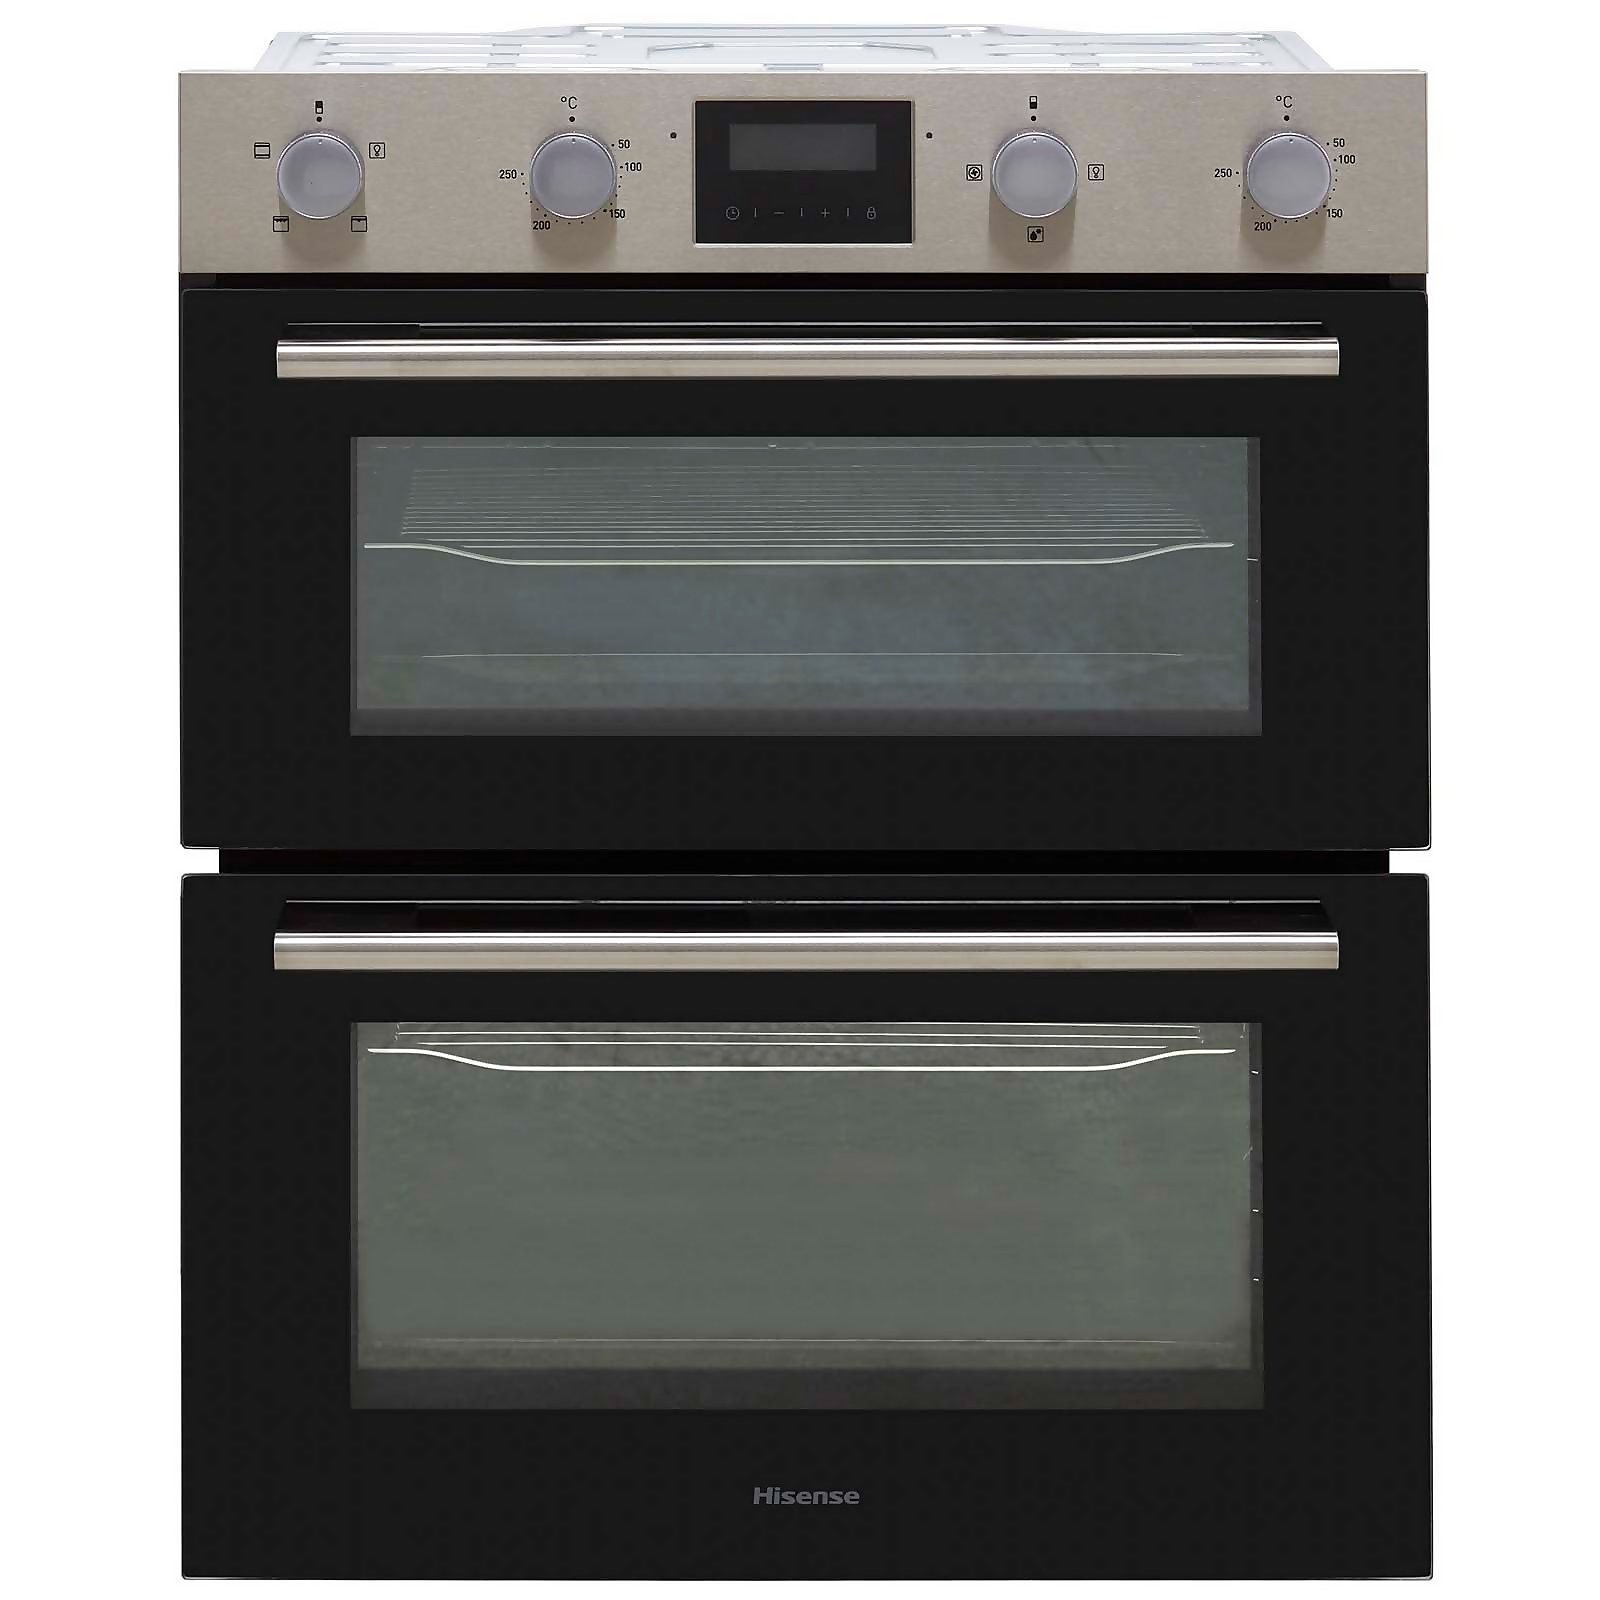 Photo of Hisense Bid75211xuk Built Under Electric Double Oven - Stainless Steel - A/a Rated